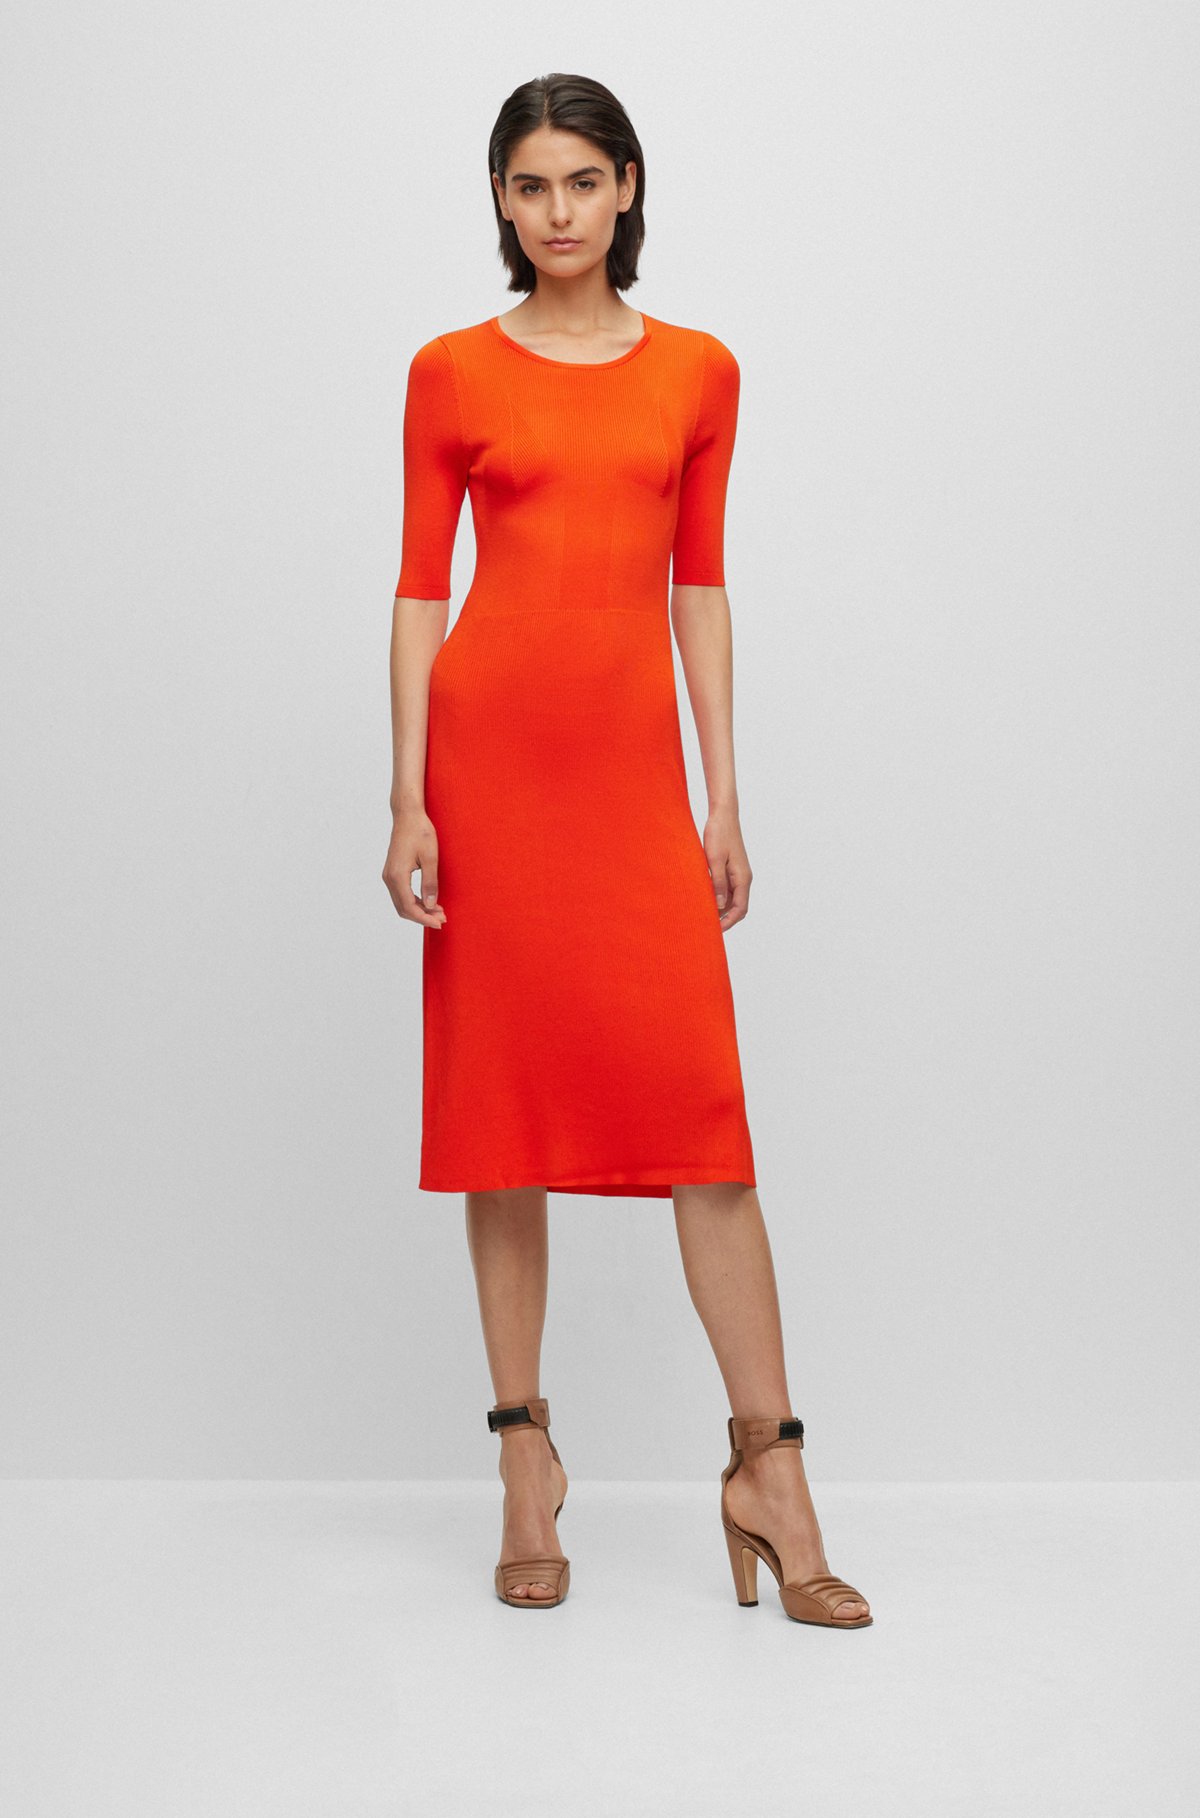 Cropped-sleeve dress with knitted structure, Dark Orange